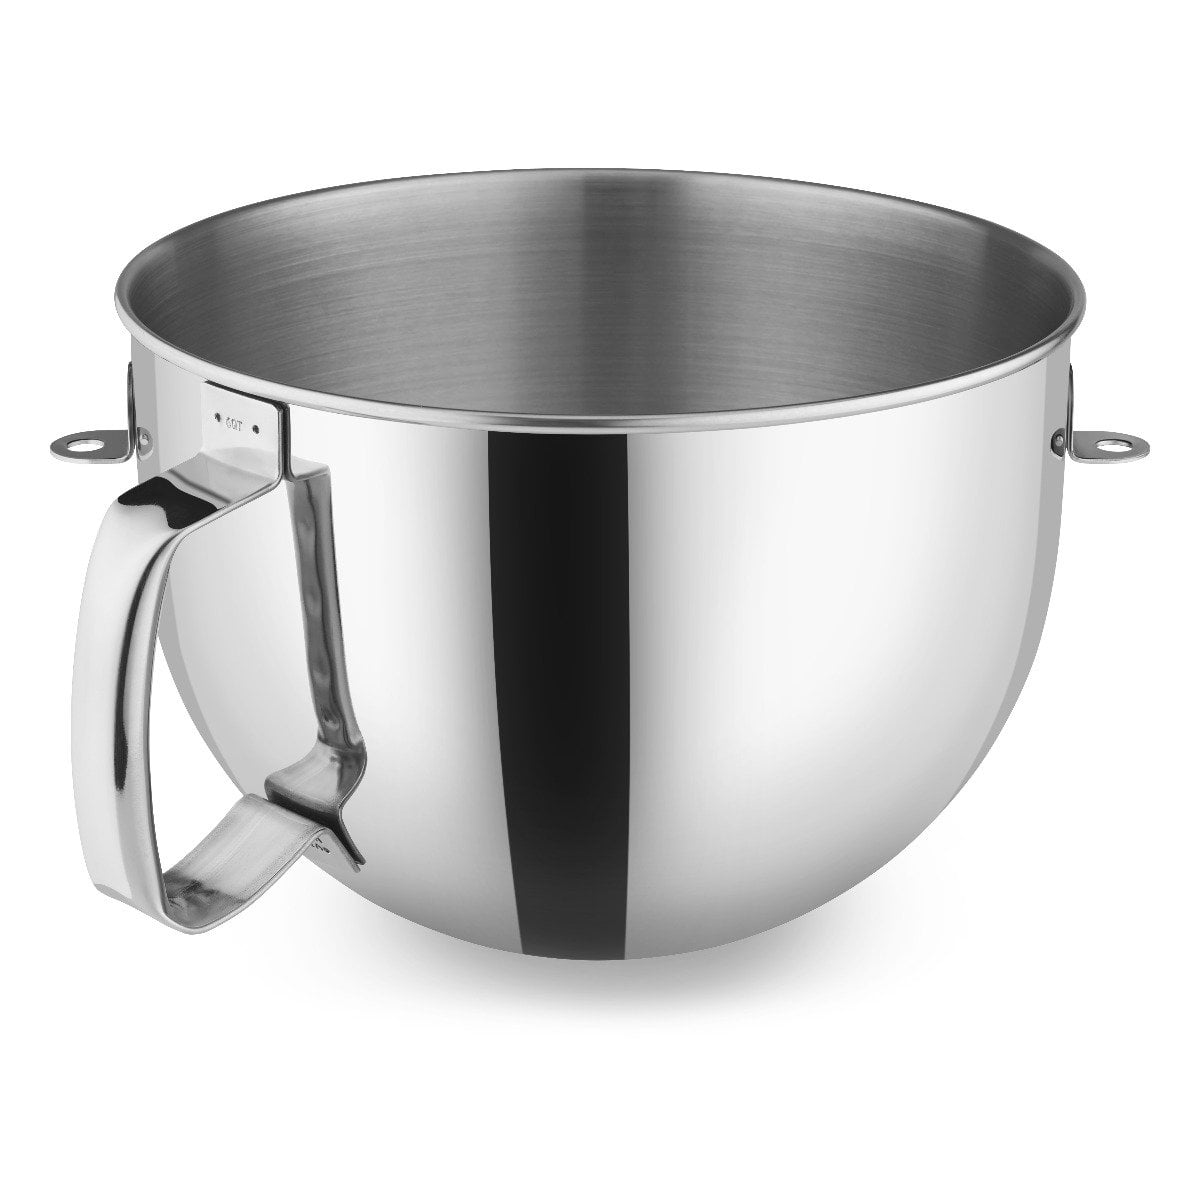 5 Qt. Stainless Steel Bowl + Pouring Shield + Flex Edge Accessory